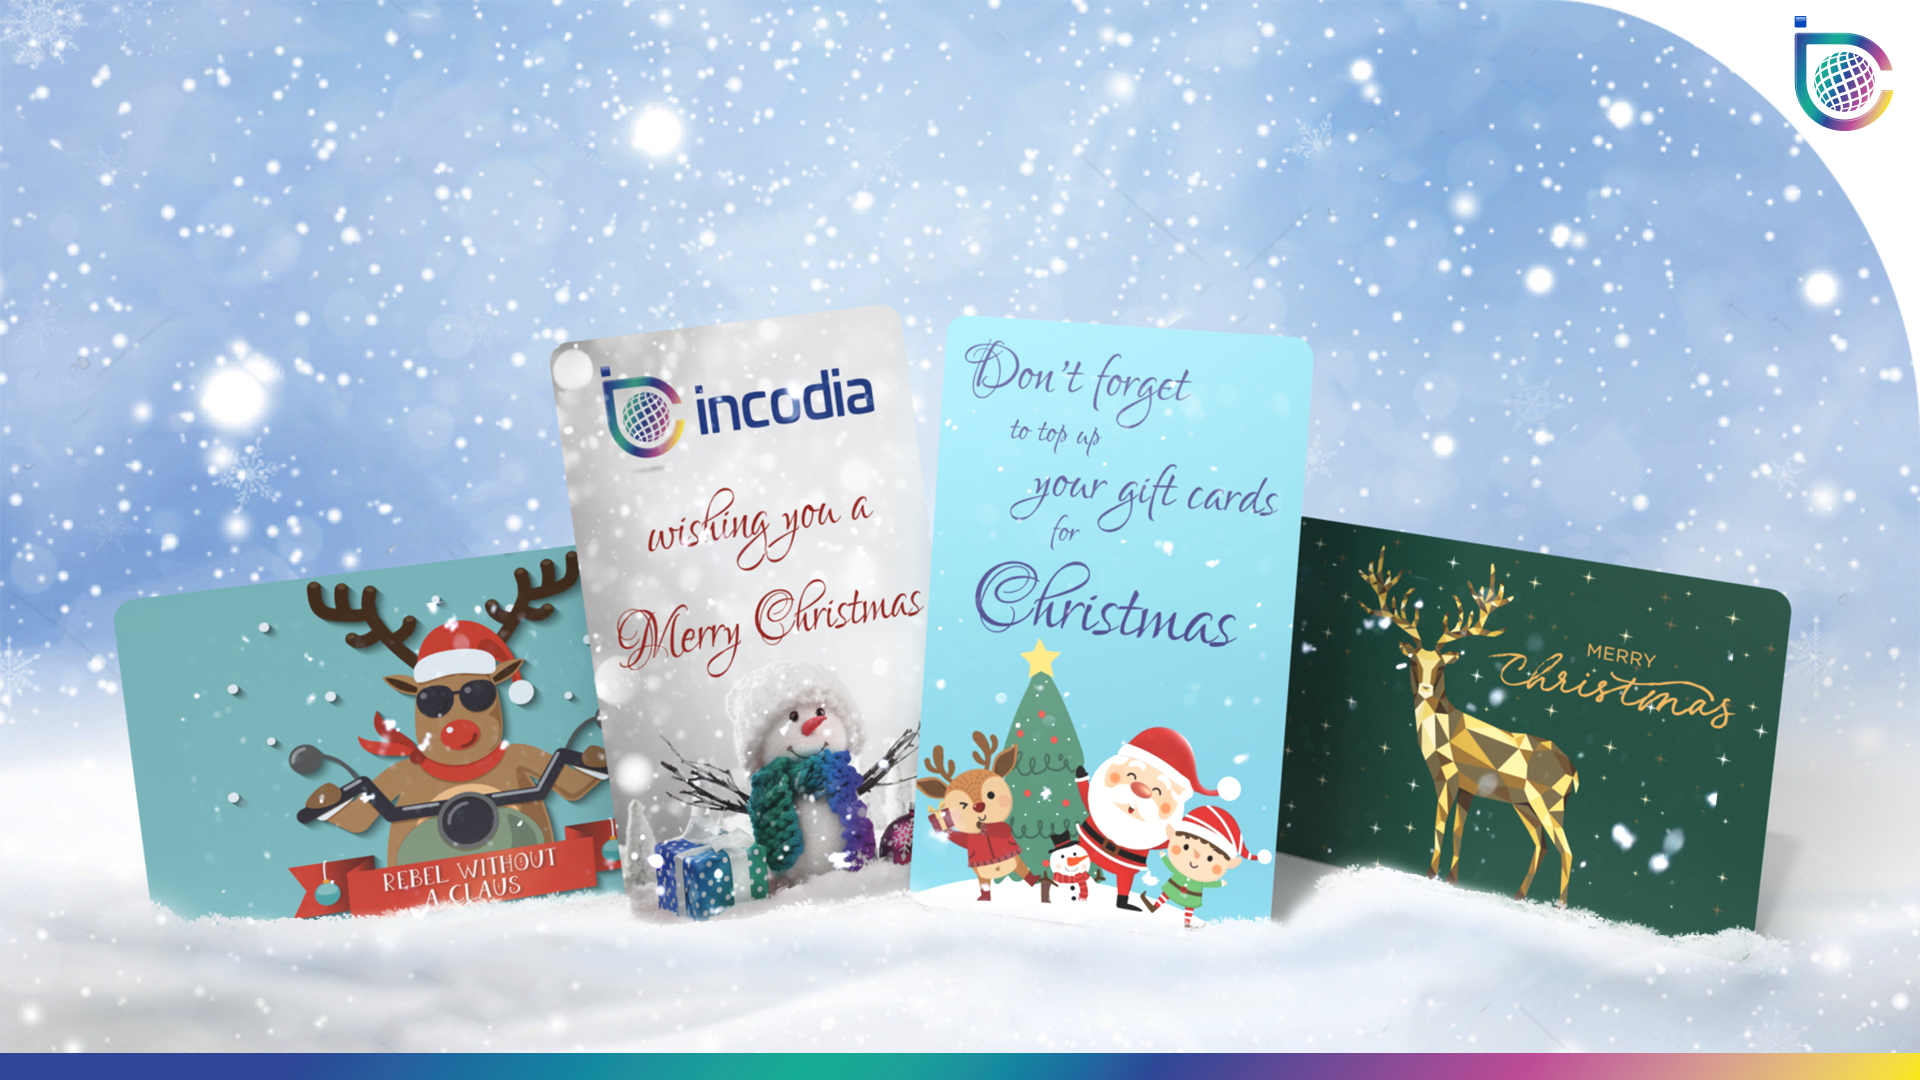 Don’t forget to top-up your Christmas gift cards!